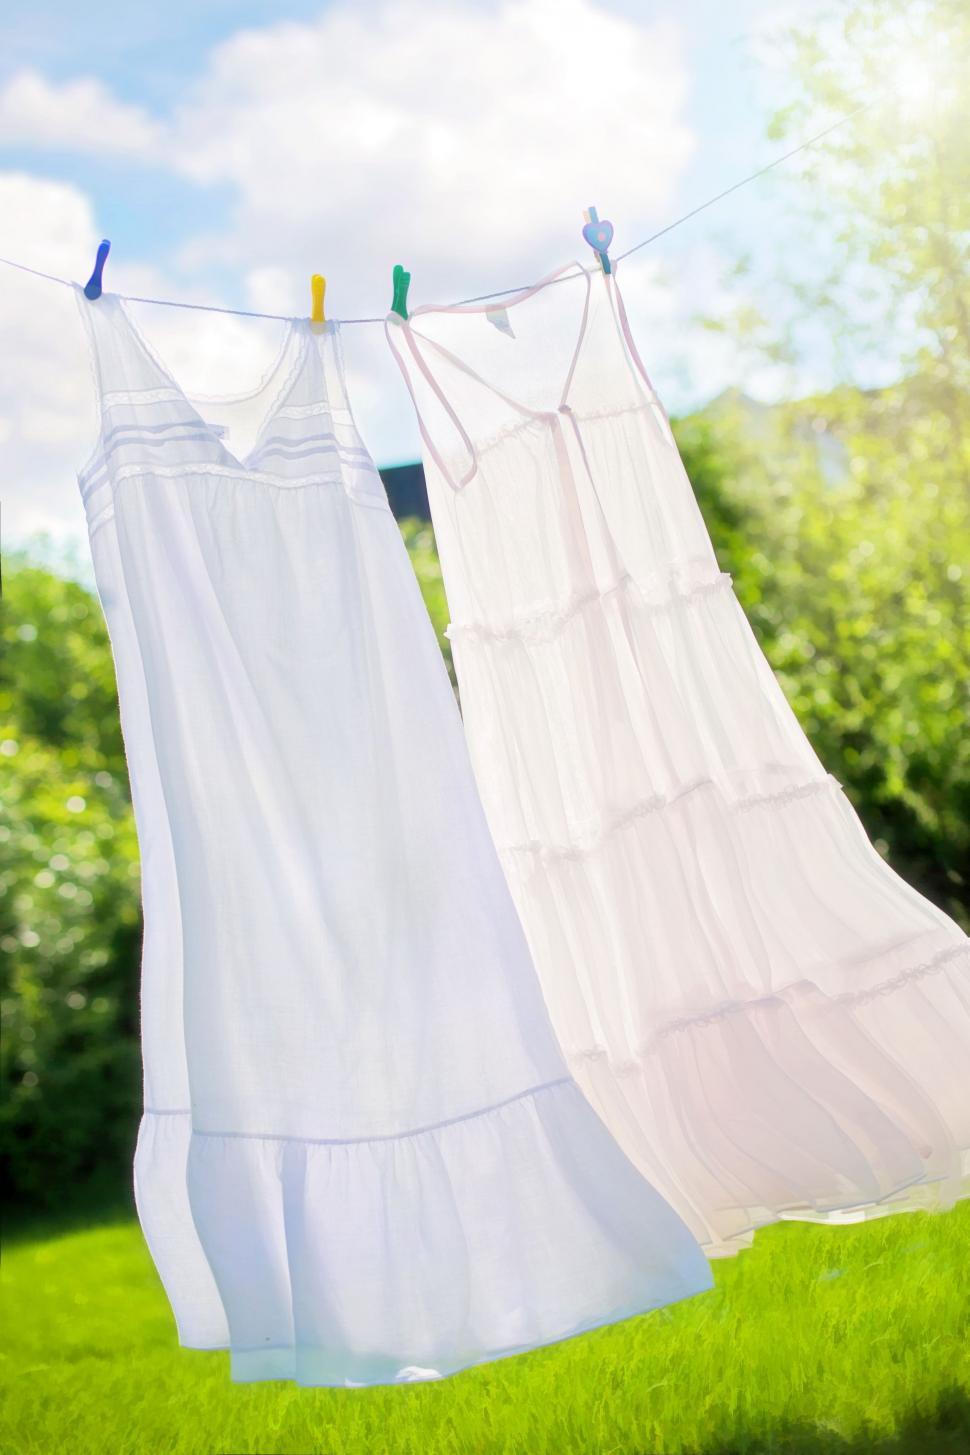 Free Stock Photo of Clothes hanging on the clothesline